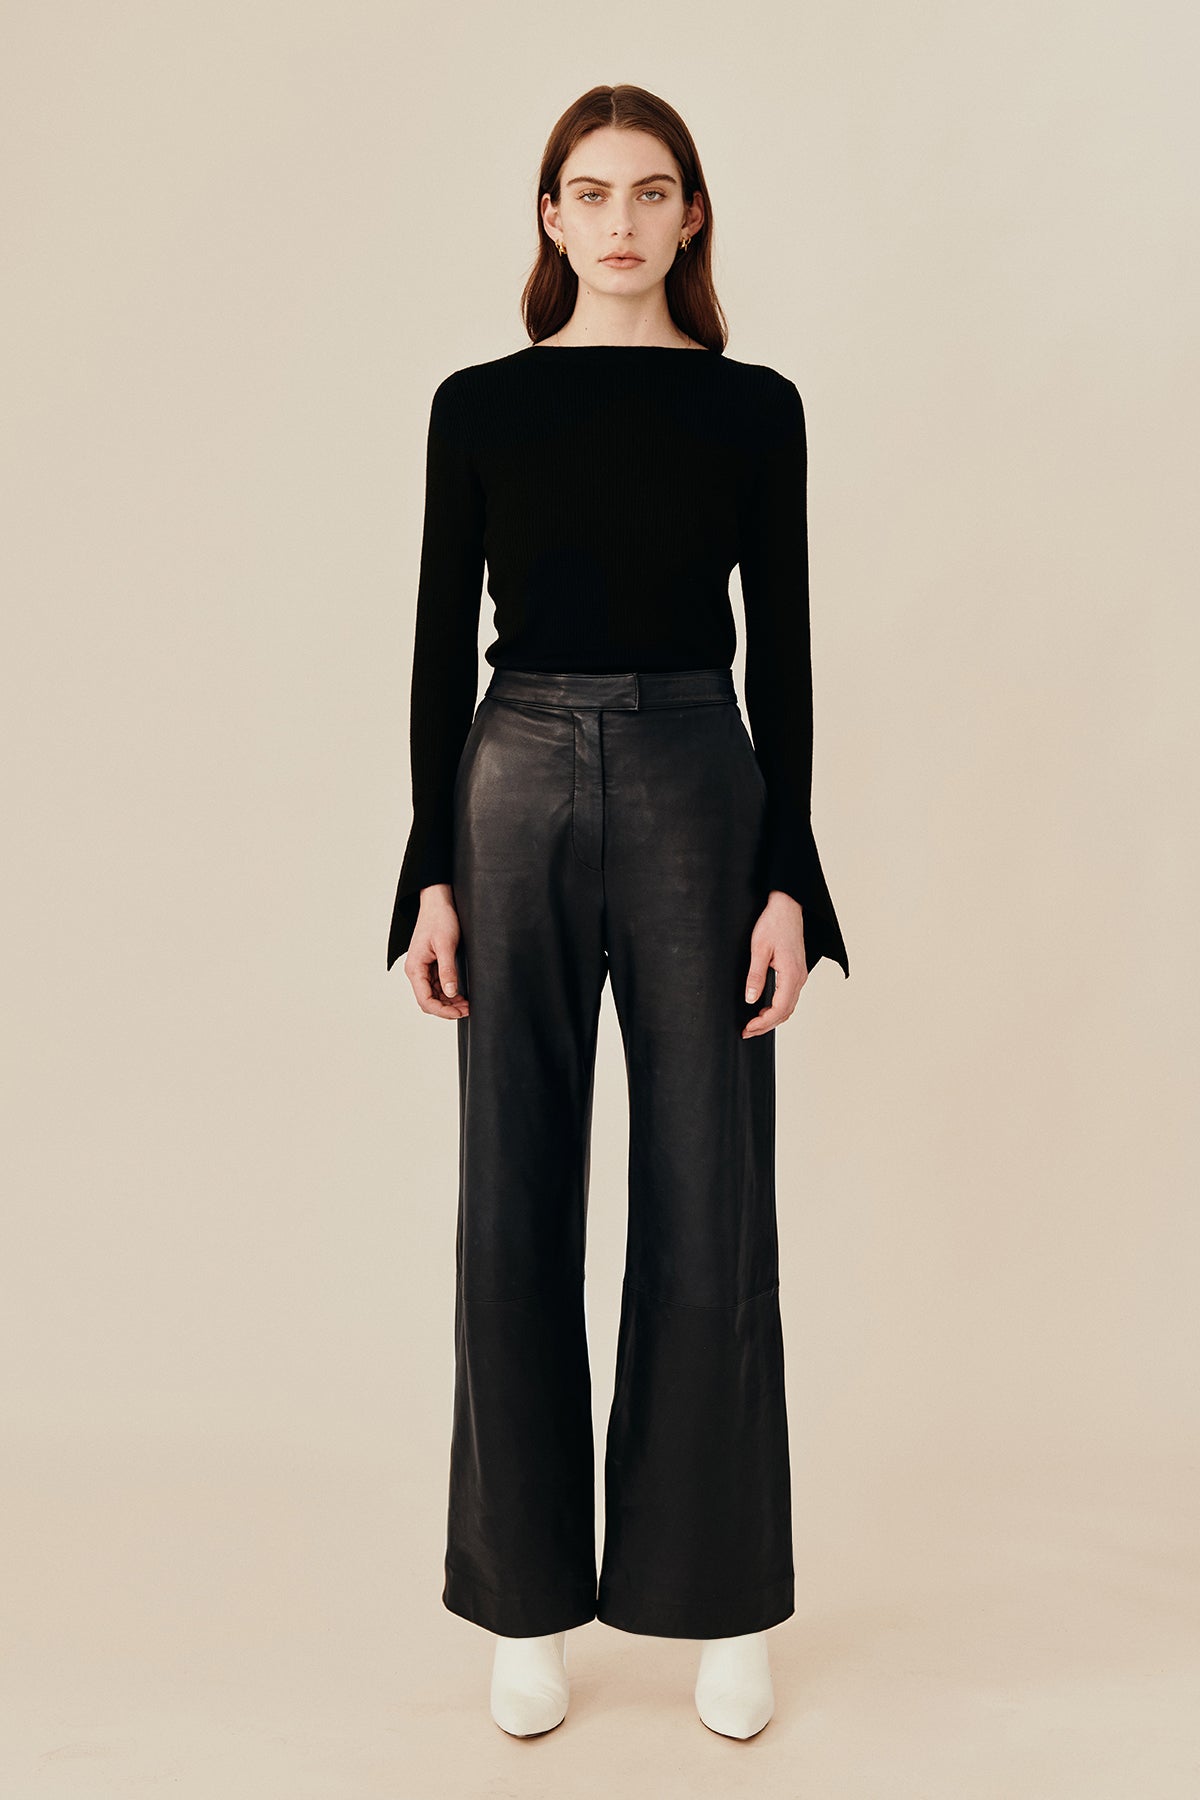 Model wearing Australian fashion designer Ginger & Smarts’ Genesis Leather Pant in a classic straight leg cut in luxe black leather worn with the black wool Dimension Knit Top.